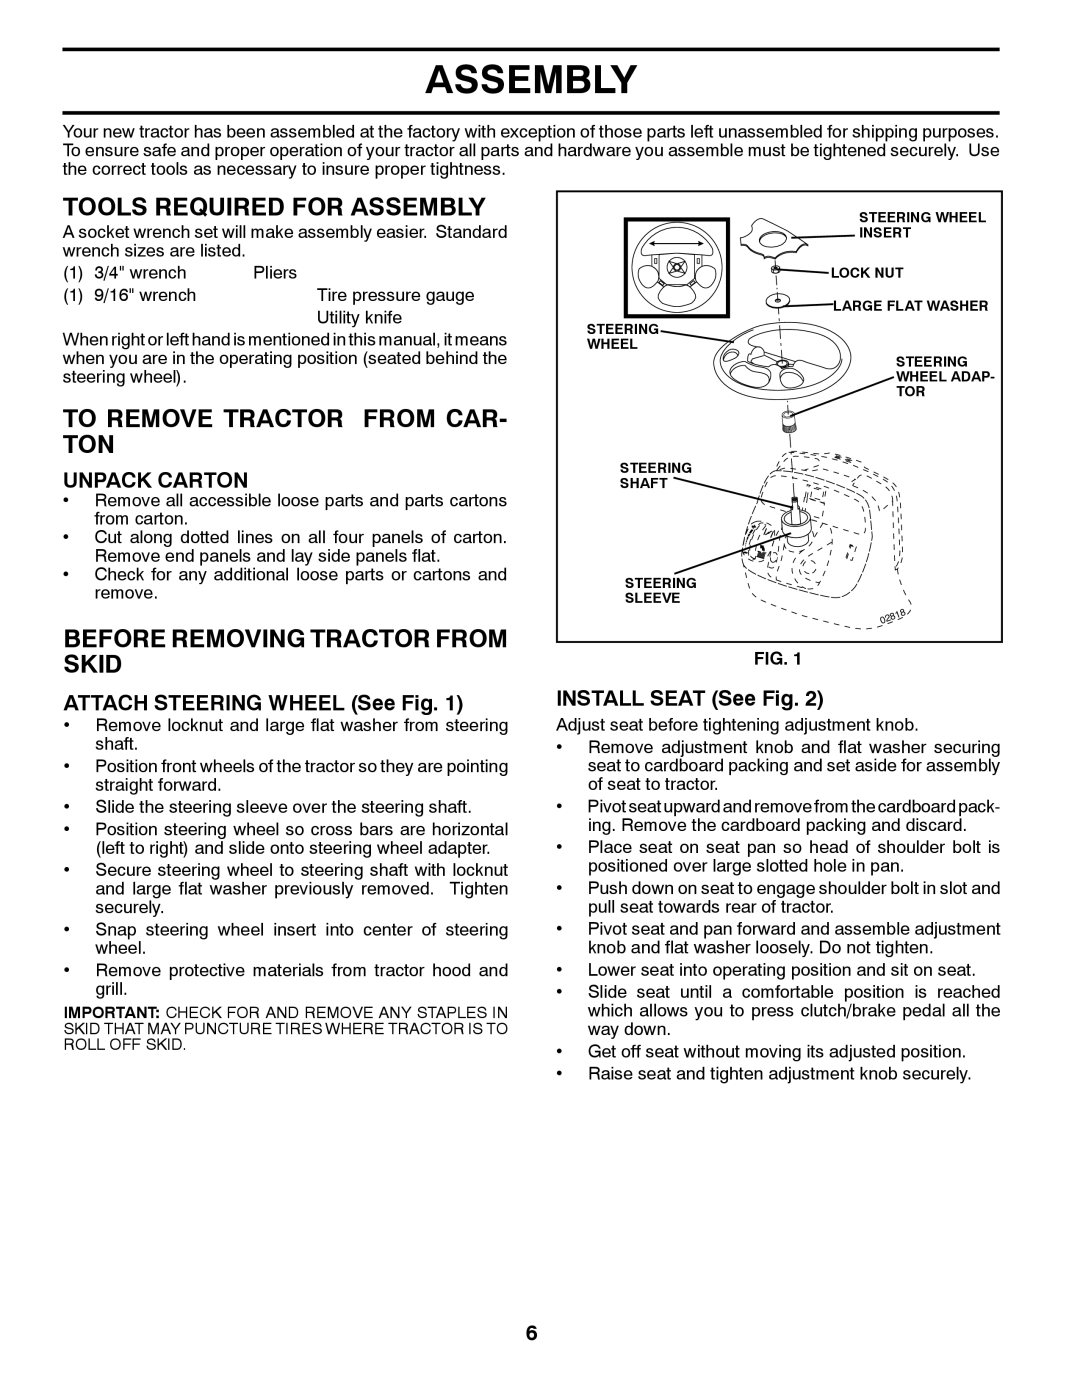 Poulan PK20H42YT manual Tools Required For Assembly, To Remove Tractor From Car- Ton, Before Removing Tractor From Skid 